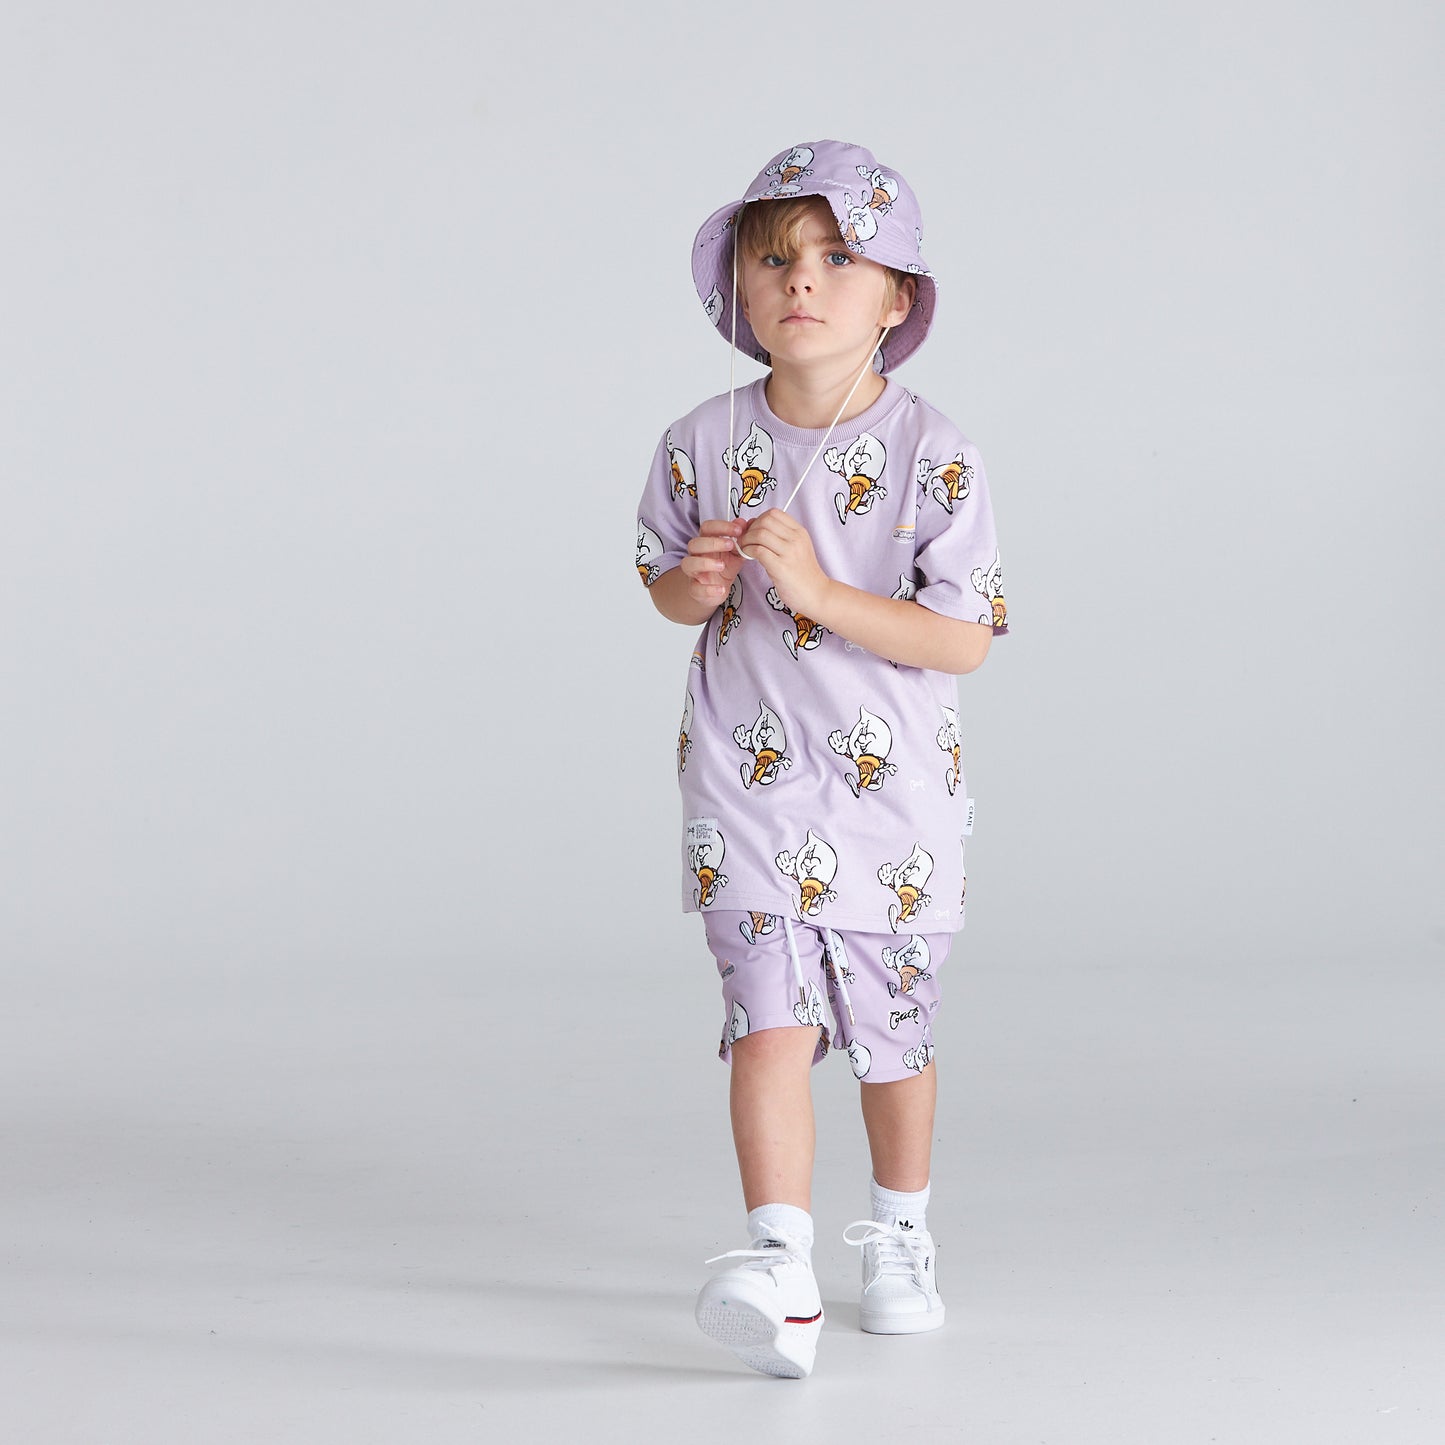 CRATE KIDS // Mr Whippy Bucket Hat LILAC